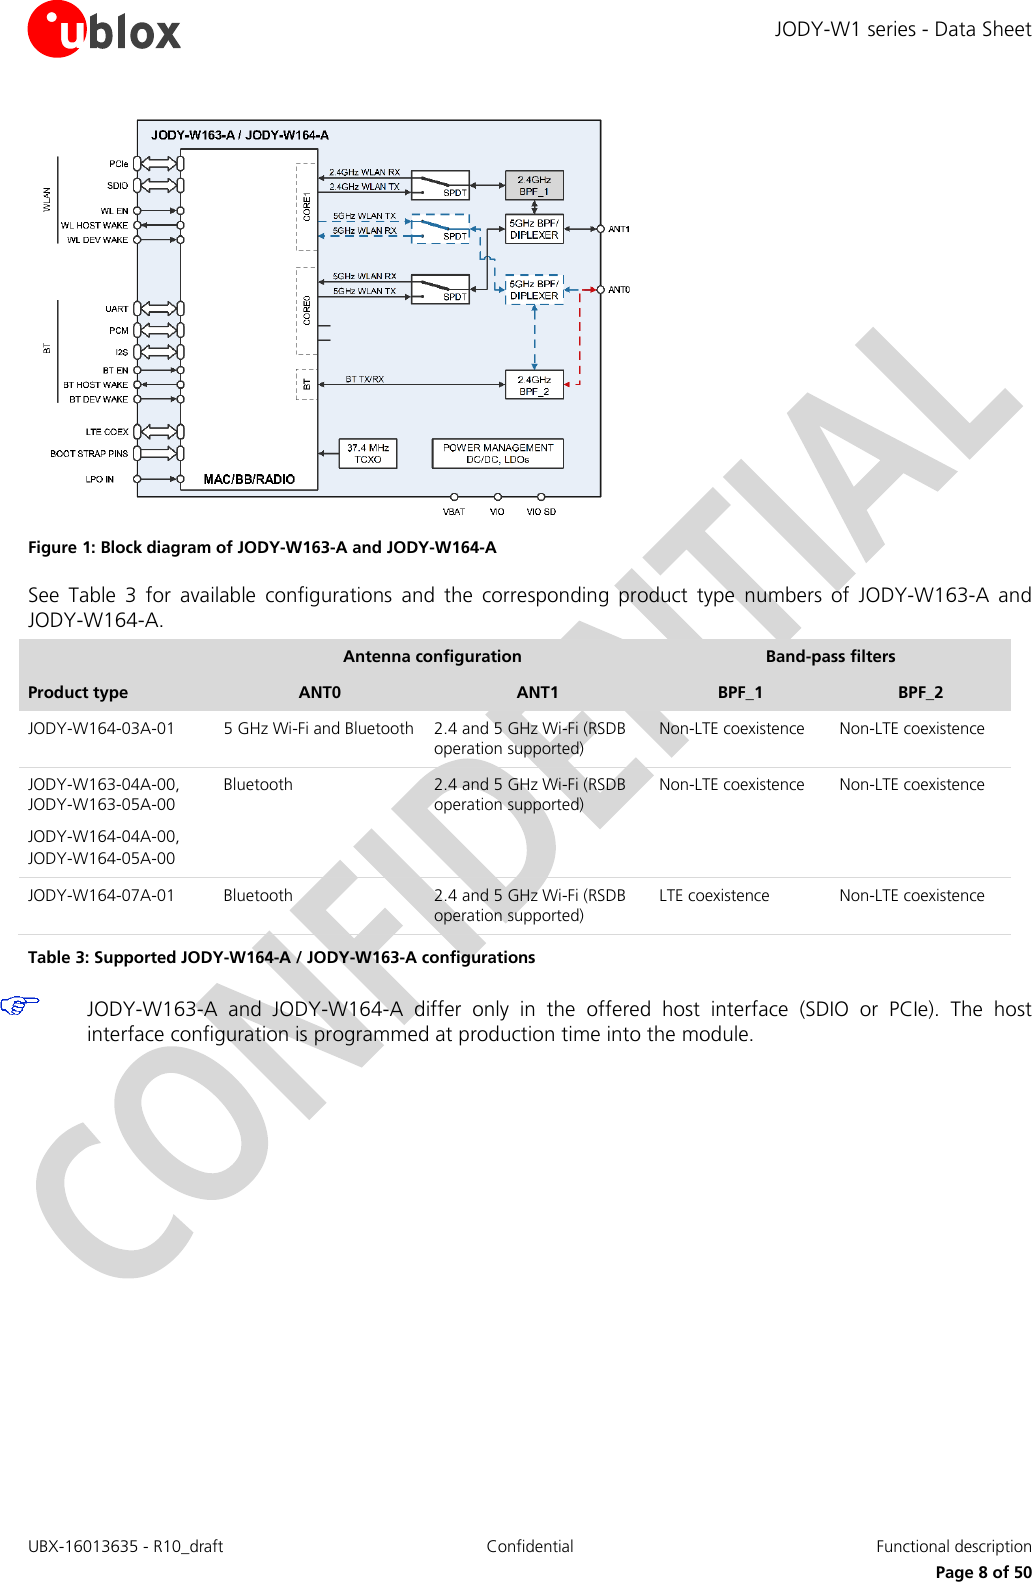 JODY-W1 series - Data Sheet UBX-16013635 - R10_draft Confidential  Functional description     Page 8 of 50  Figure 1: Block diagram of JODY-W163-A and JODY-W164-A See  Table  3  for  available  configurations  and  the  corresponding  product  type  numbers  of  JODY-W163-A  and JODY-W164-A. Product type Antenna configuration Band-pass filters ANT0 ANT1 BPF_1 BPF_2 JODY-W164-03A-01 5 GHz Wi-Fi and Bluetooth  2.4 and 5 GHz Wi-Fi (RSDB operation supported) Non-LTE coexistence Non-LTE coexistence JODY-W163-04A-00, JODY-W163-05A-00 JODY-W164-04A-00, JODY-W164-05A-00 Bluetooth 2.4 and 5 GHz Wi-Fi (RSDB operation supported) Non-LTE coexistence Non-LTE coexistence JODY-W164-07A-01 Bluetooth 2.4 and 5 GHz Wi-Fi (RSDB operation supported) LTE coexistence Non-LTE coexistence Table 3: Supported JODY-W164-A / JODY-W163-A configurations  JODY-W163-A  and  JODY-W164-A  differ  only  in  the  offered  host  interface  (SDIO  or  PCIe).  The  host interface configuration is programmed at production time into the module.    